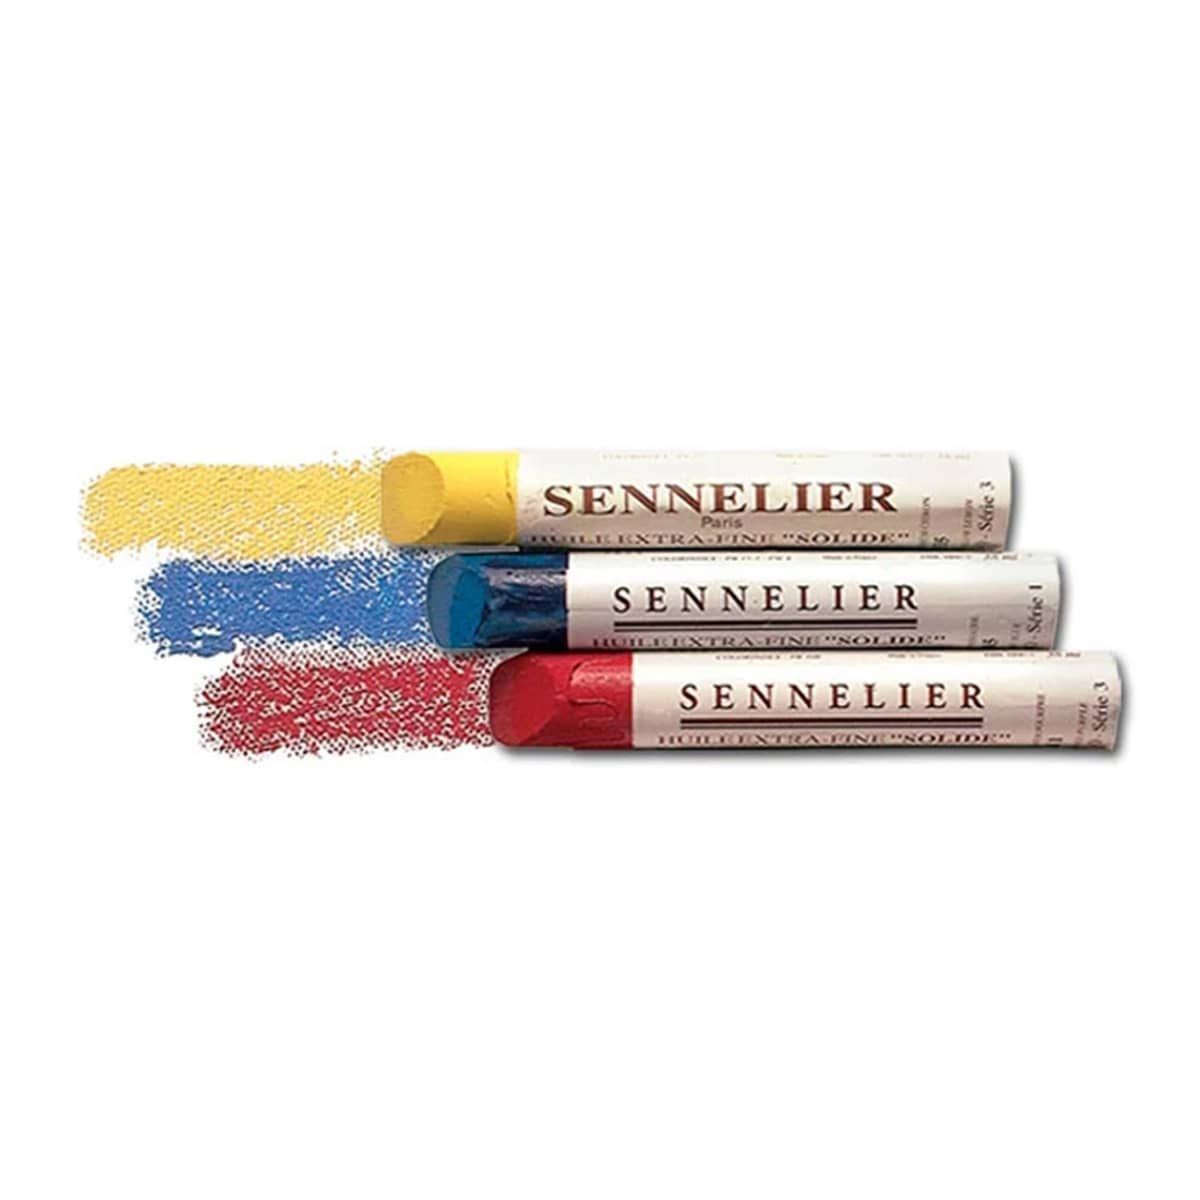 Sennelier Oil Painting Stick Used For Sketching And Other Artwork Oil Paint  Sticks - Medium Sized - Water Color - AliExpress